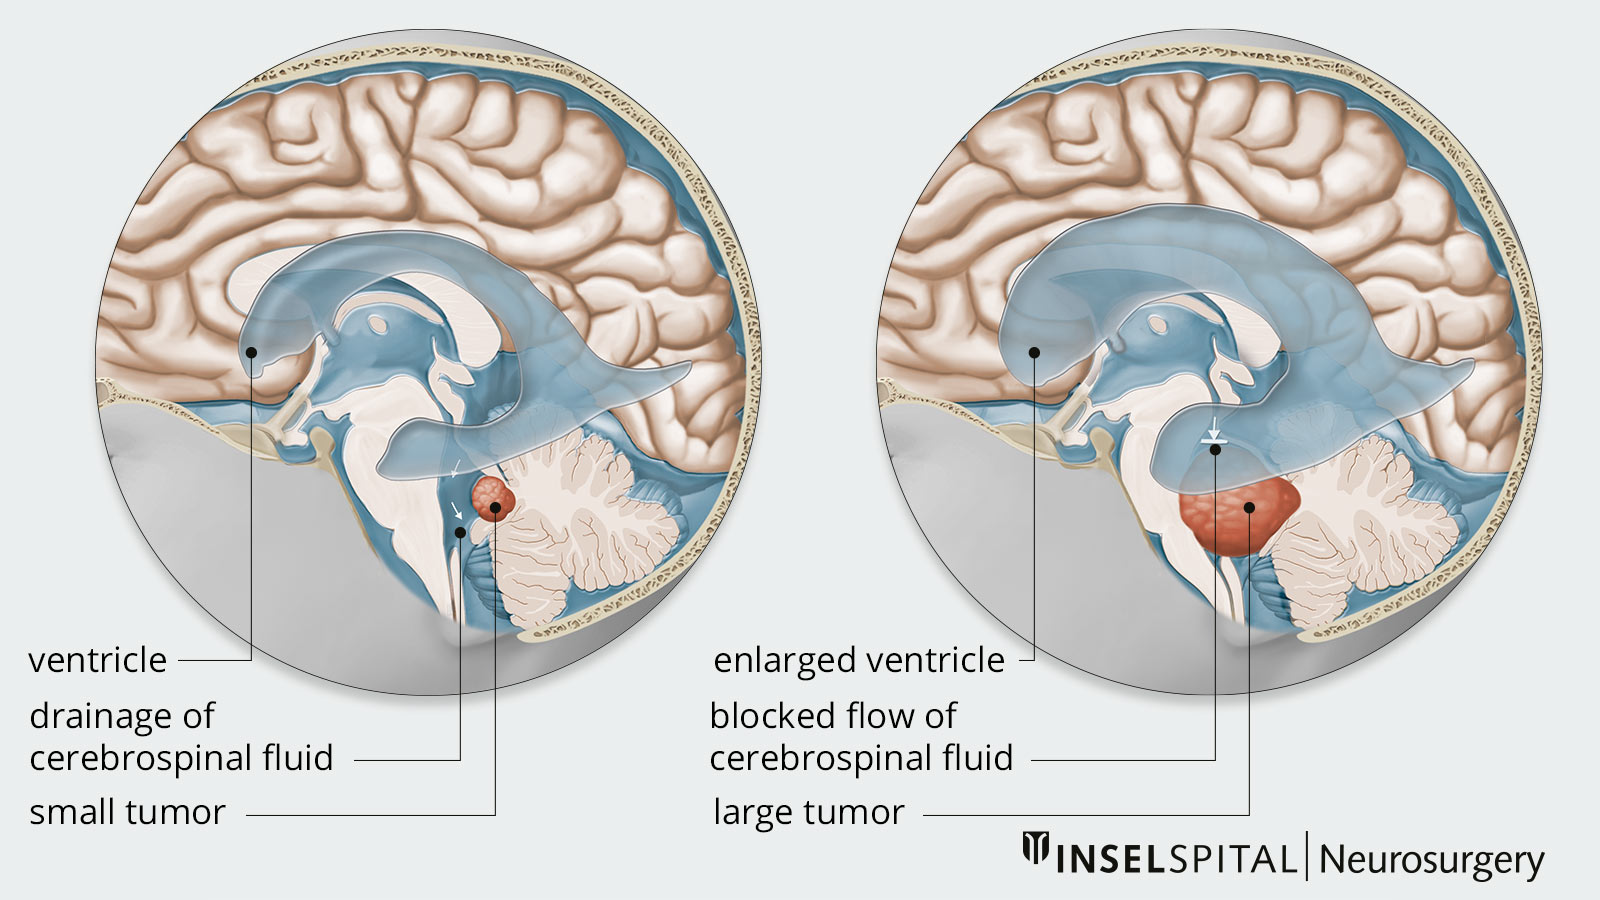 Two drawings placed side by side: Left, small tumor with normal cerebrospinal fluid outflow; right, larger tumor with impaired cerebrospinal fluid outflow.